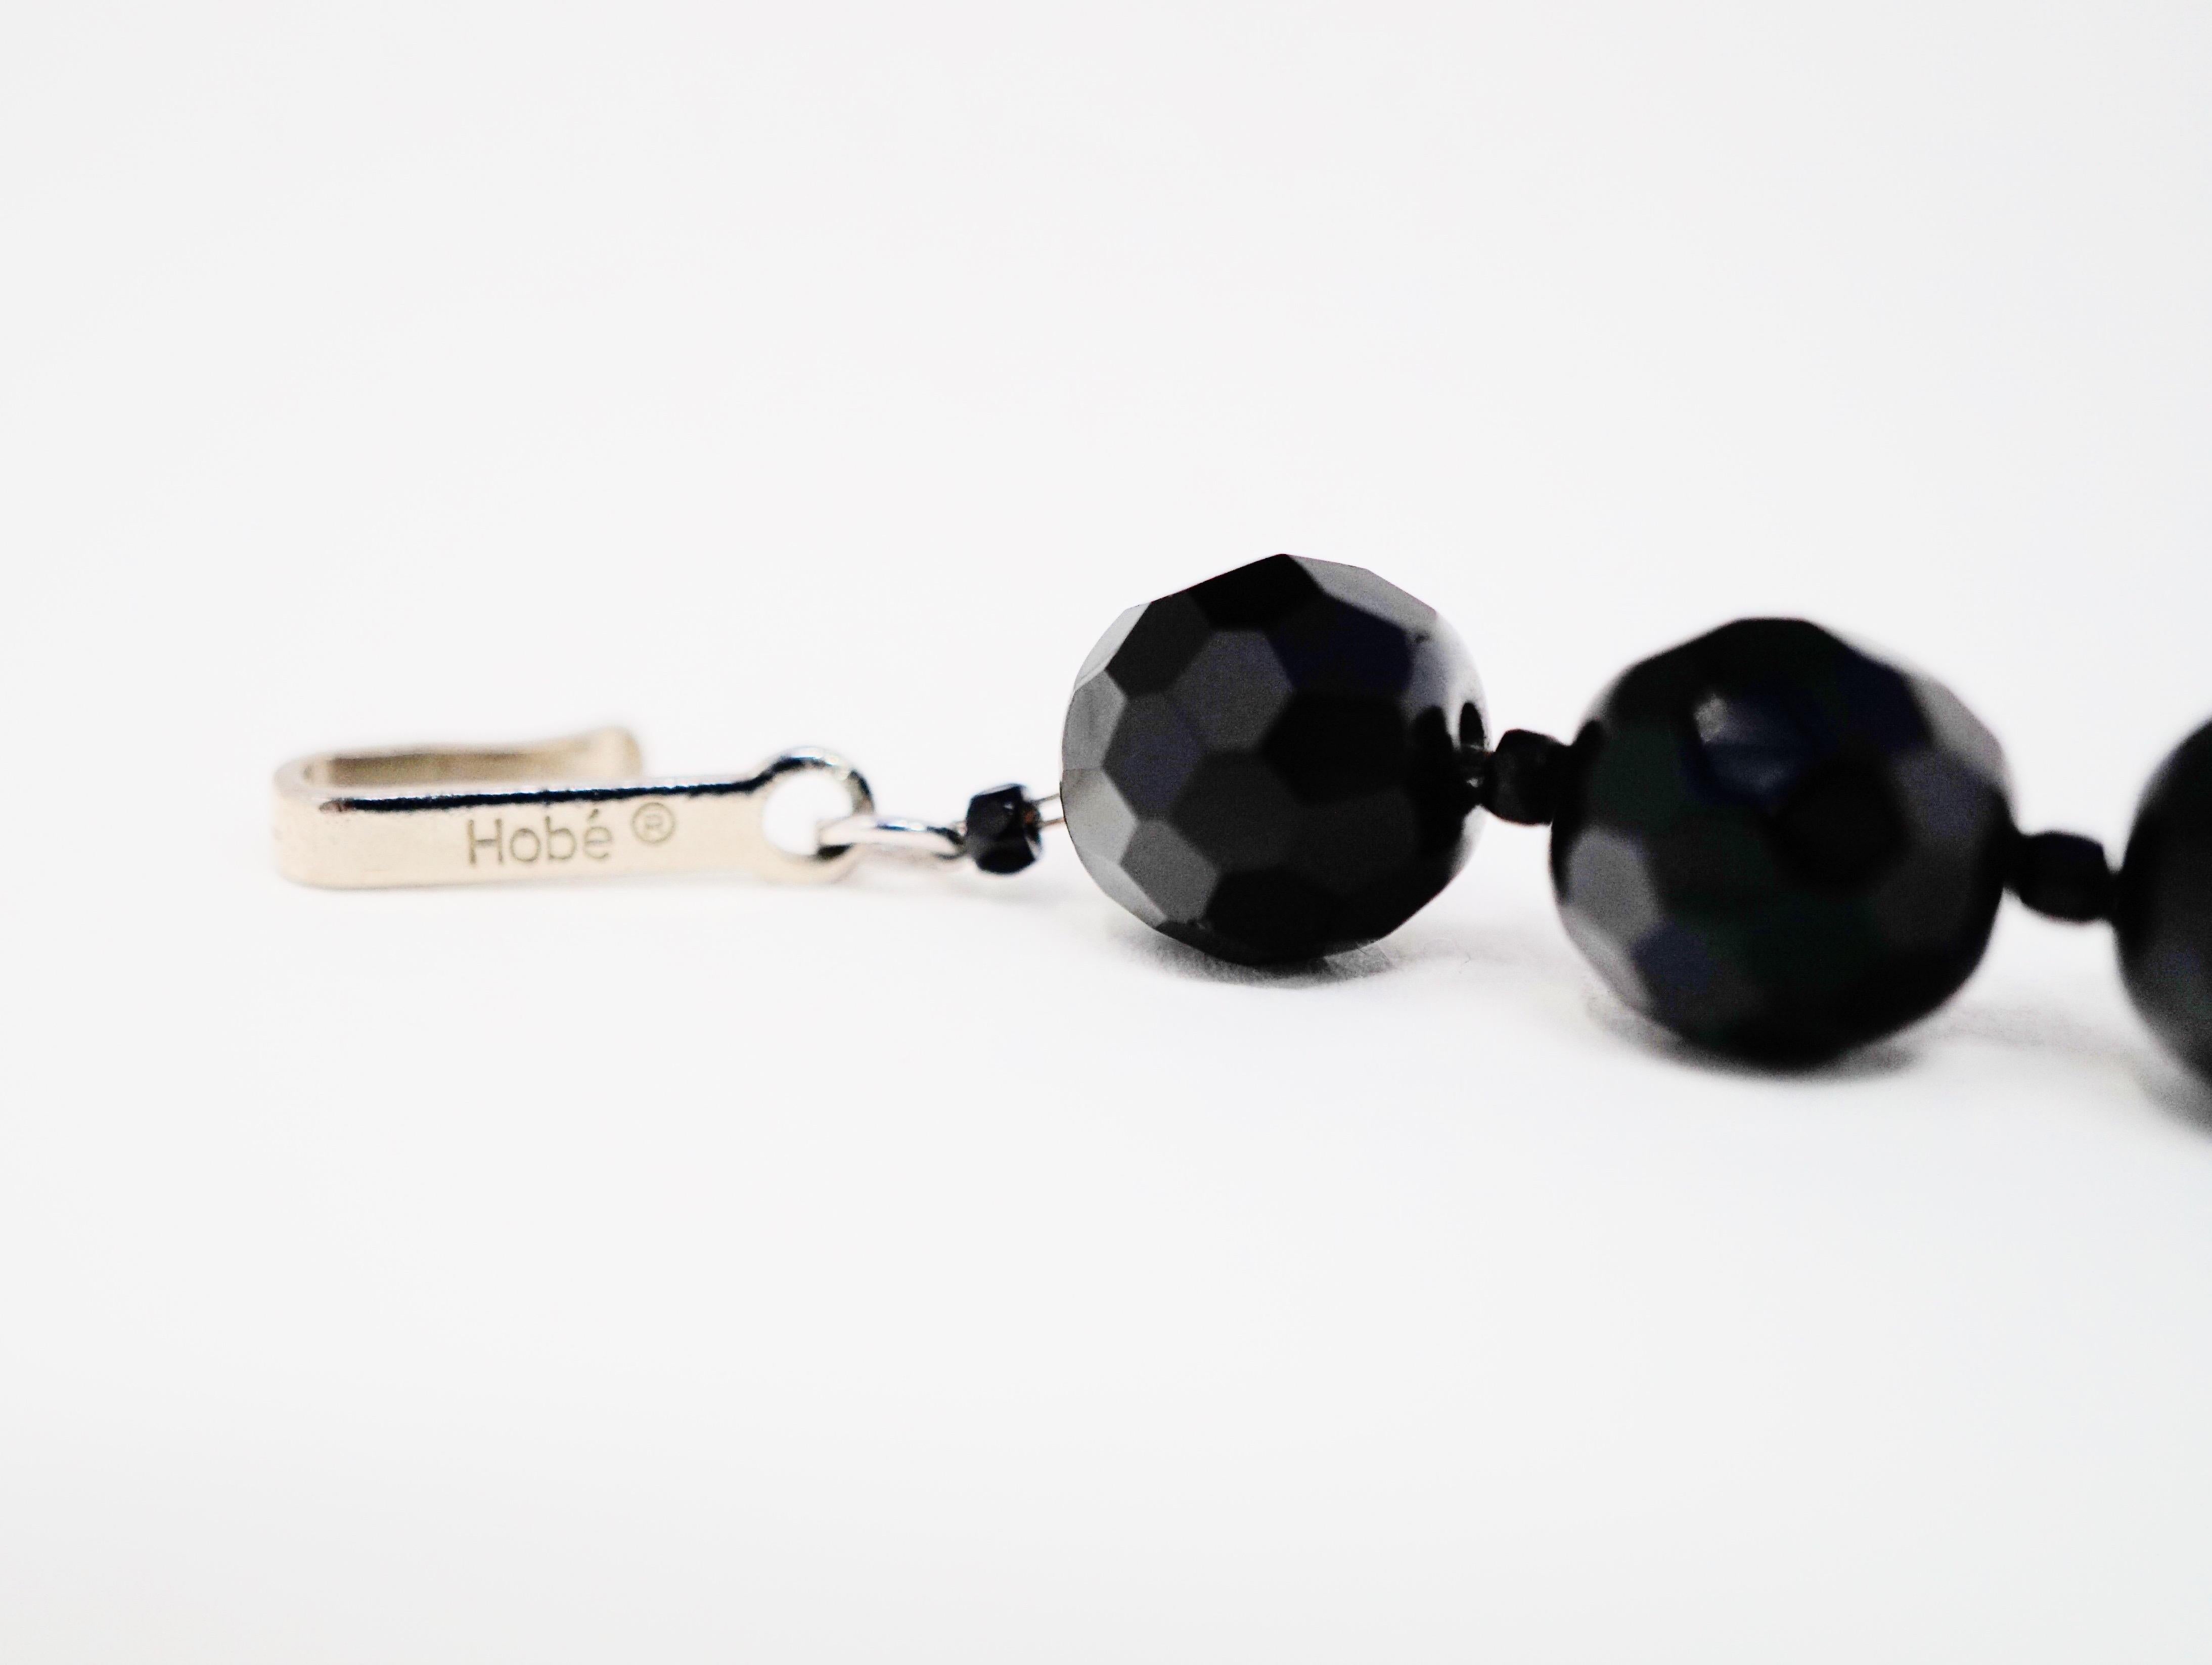 This gorgeous circa 1960s Hobé choker necklace features deep black faceted onyx beaded gemstones and accented with smooth onyx rondelle spacers.  An extremely collectible piece of design history, this choker is stylistically relevant today as it was